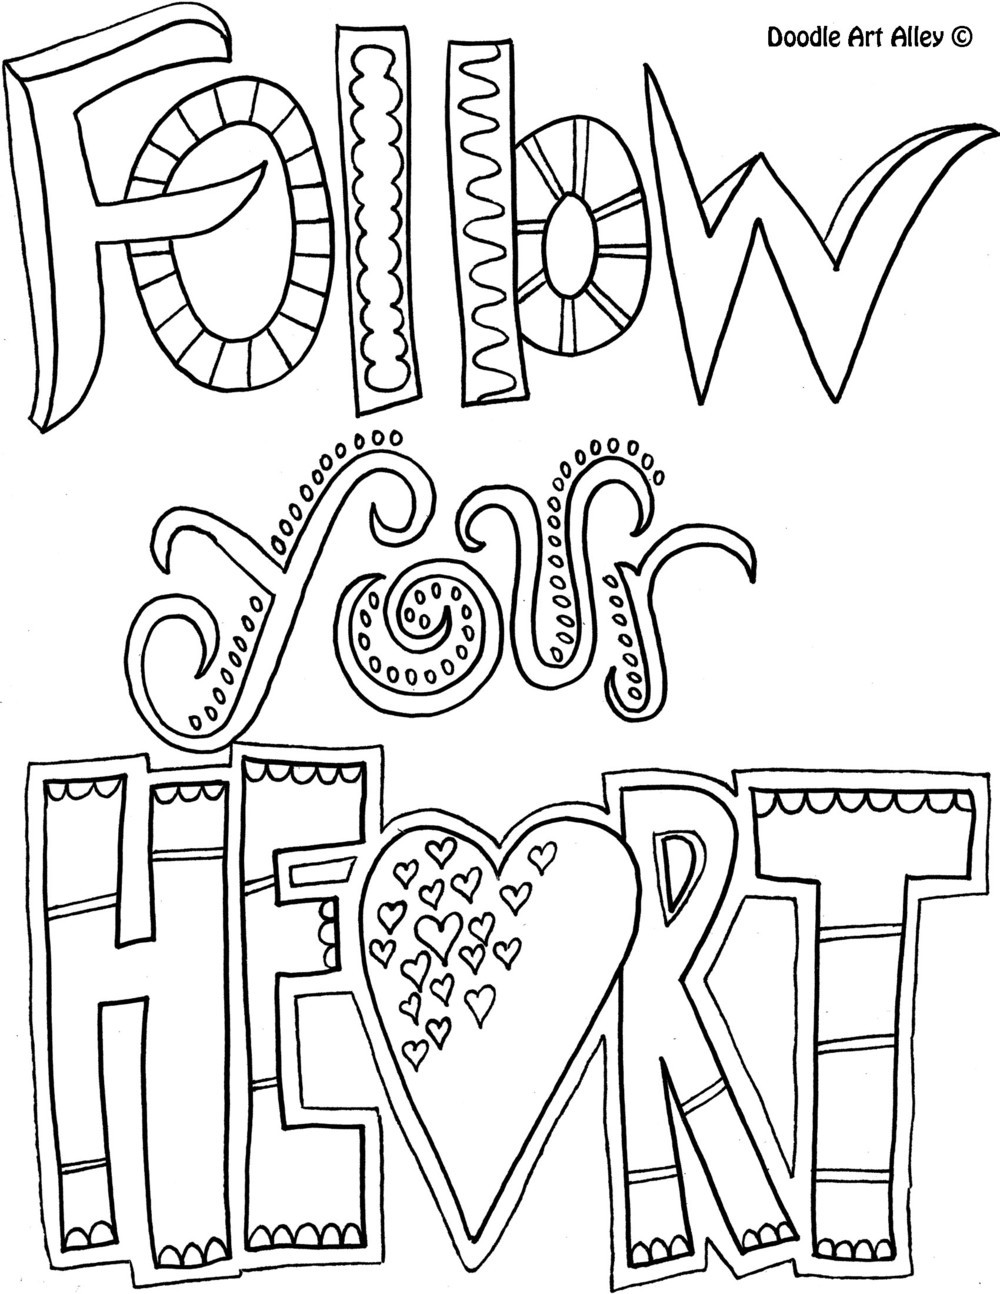 Printable Inspirational Quotes Coloring Pages
 Be e a Coloring book Enthusiast with Doodle Art Alley